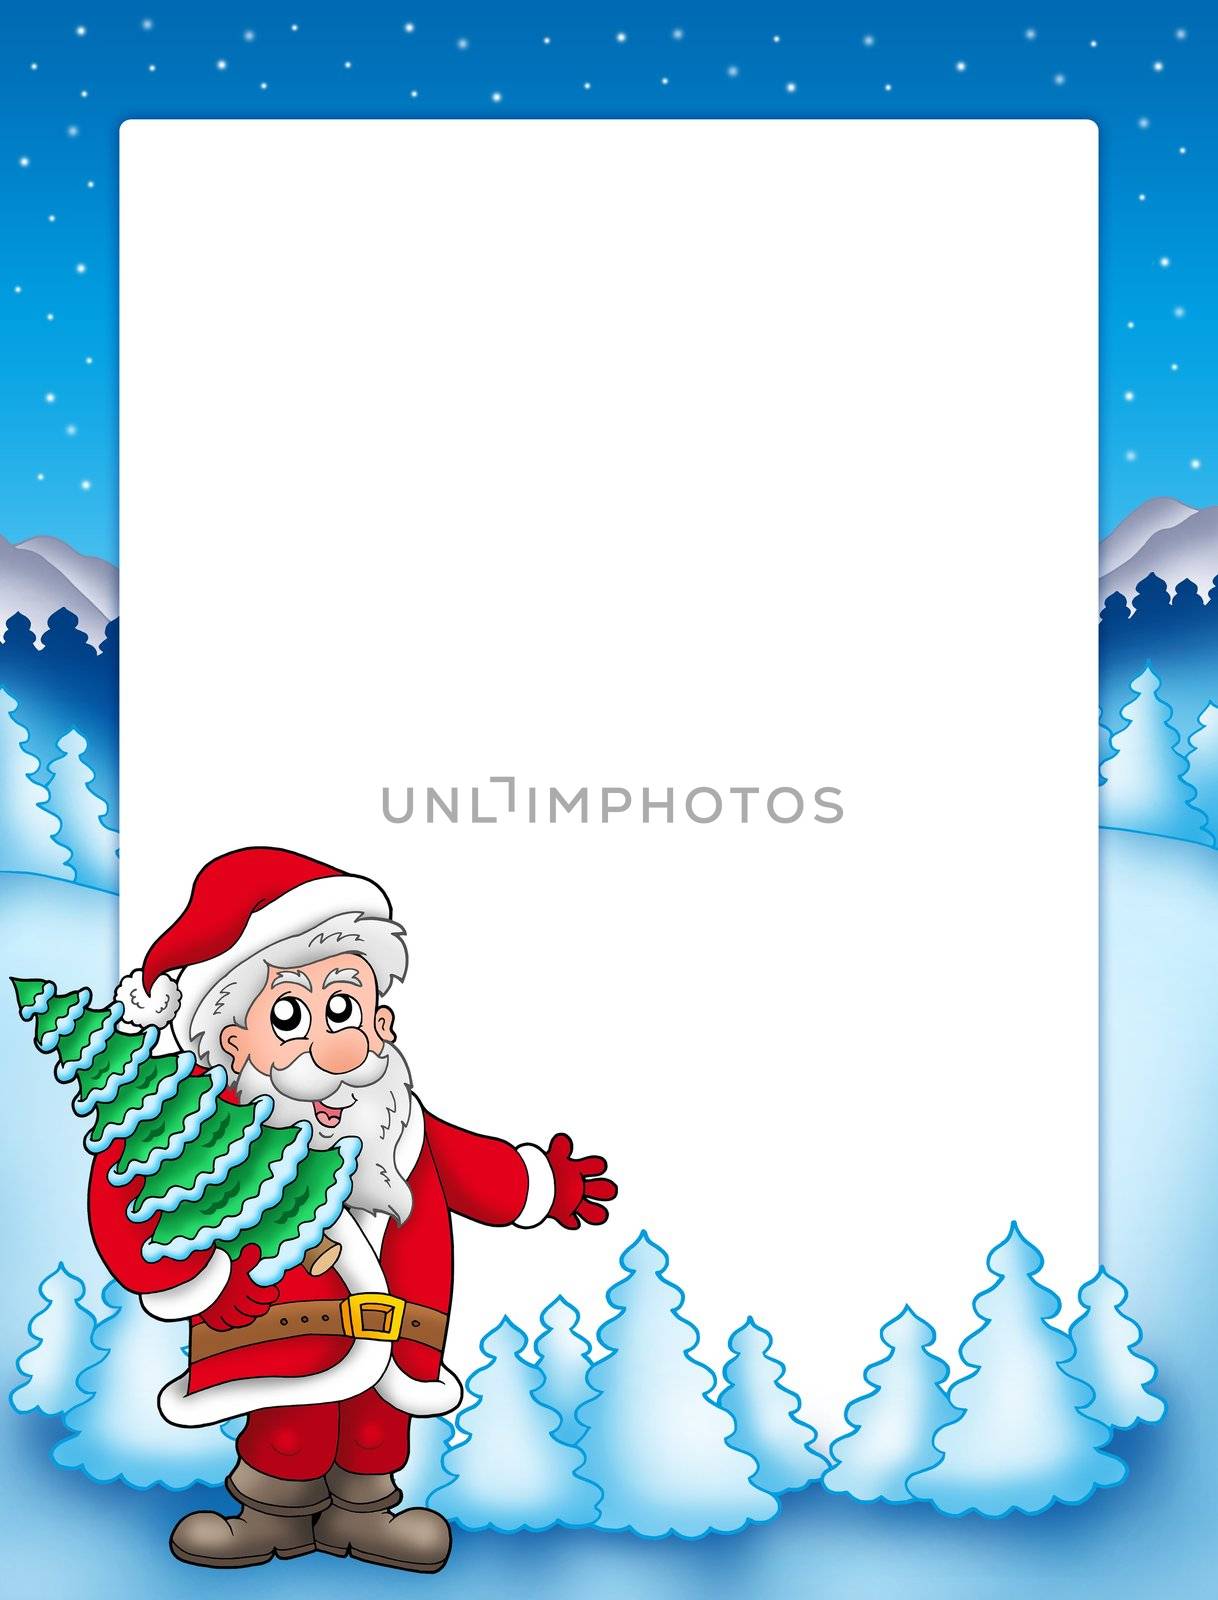 Christmas frame with Santa Claus 4 - color illustration.